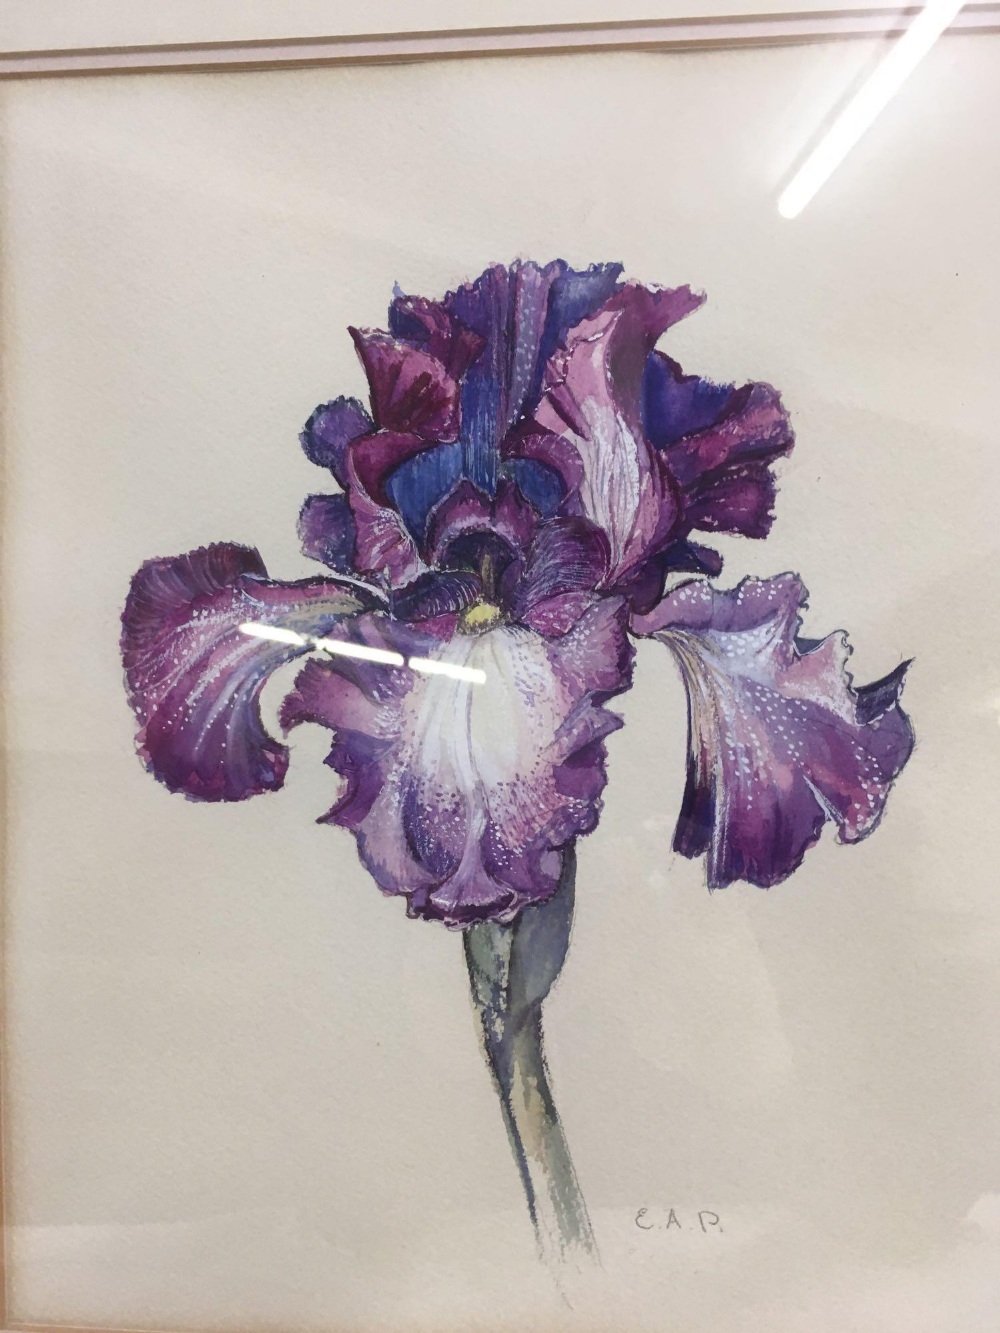 2 WATERCOLOURS OF IRISES, SIGNED WITH INITIALS - Image 2 of 4